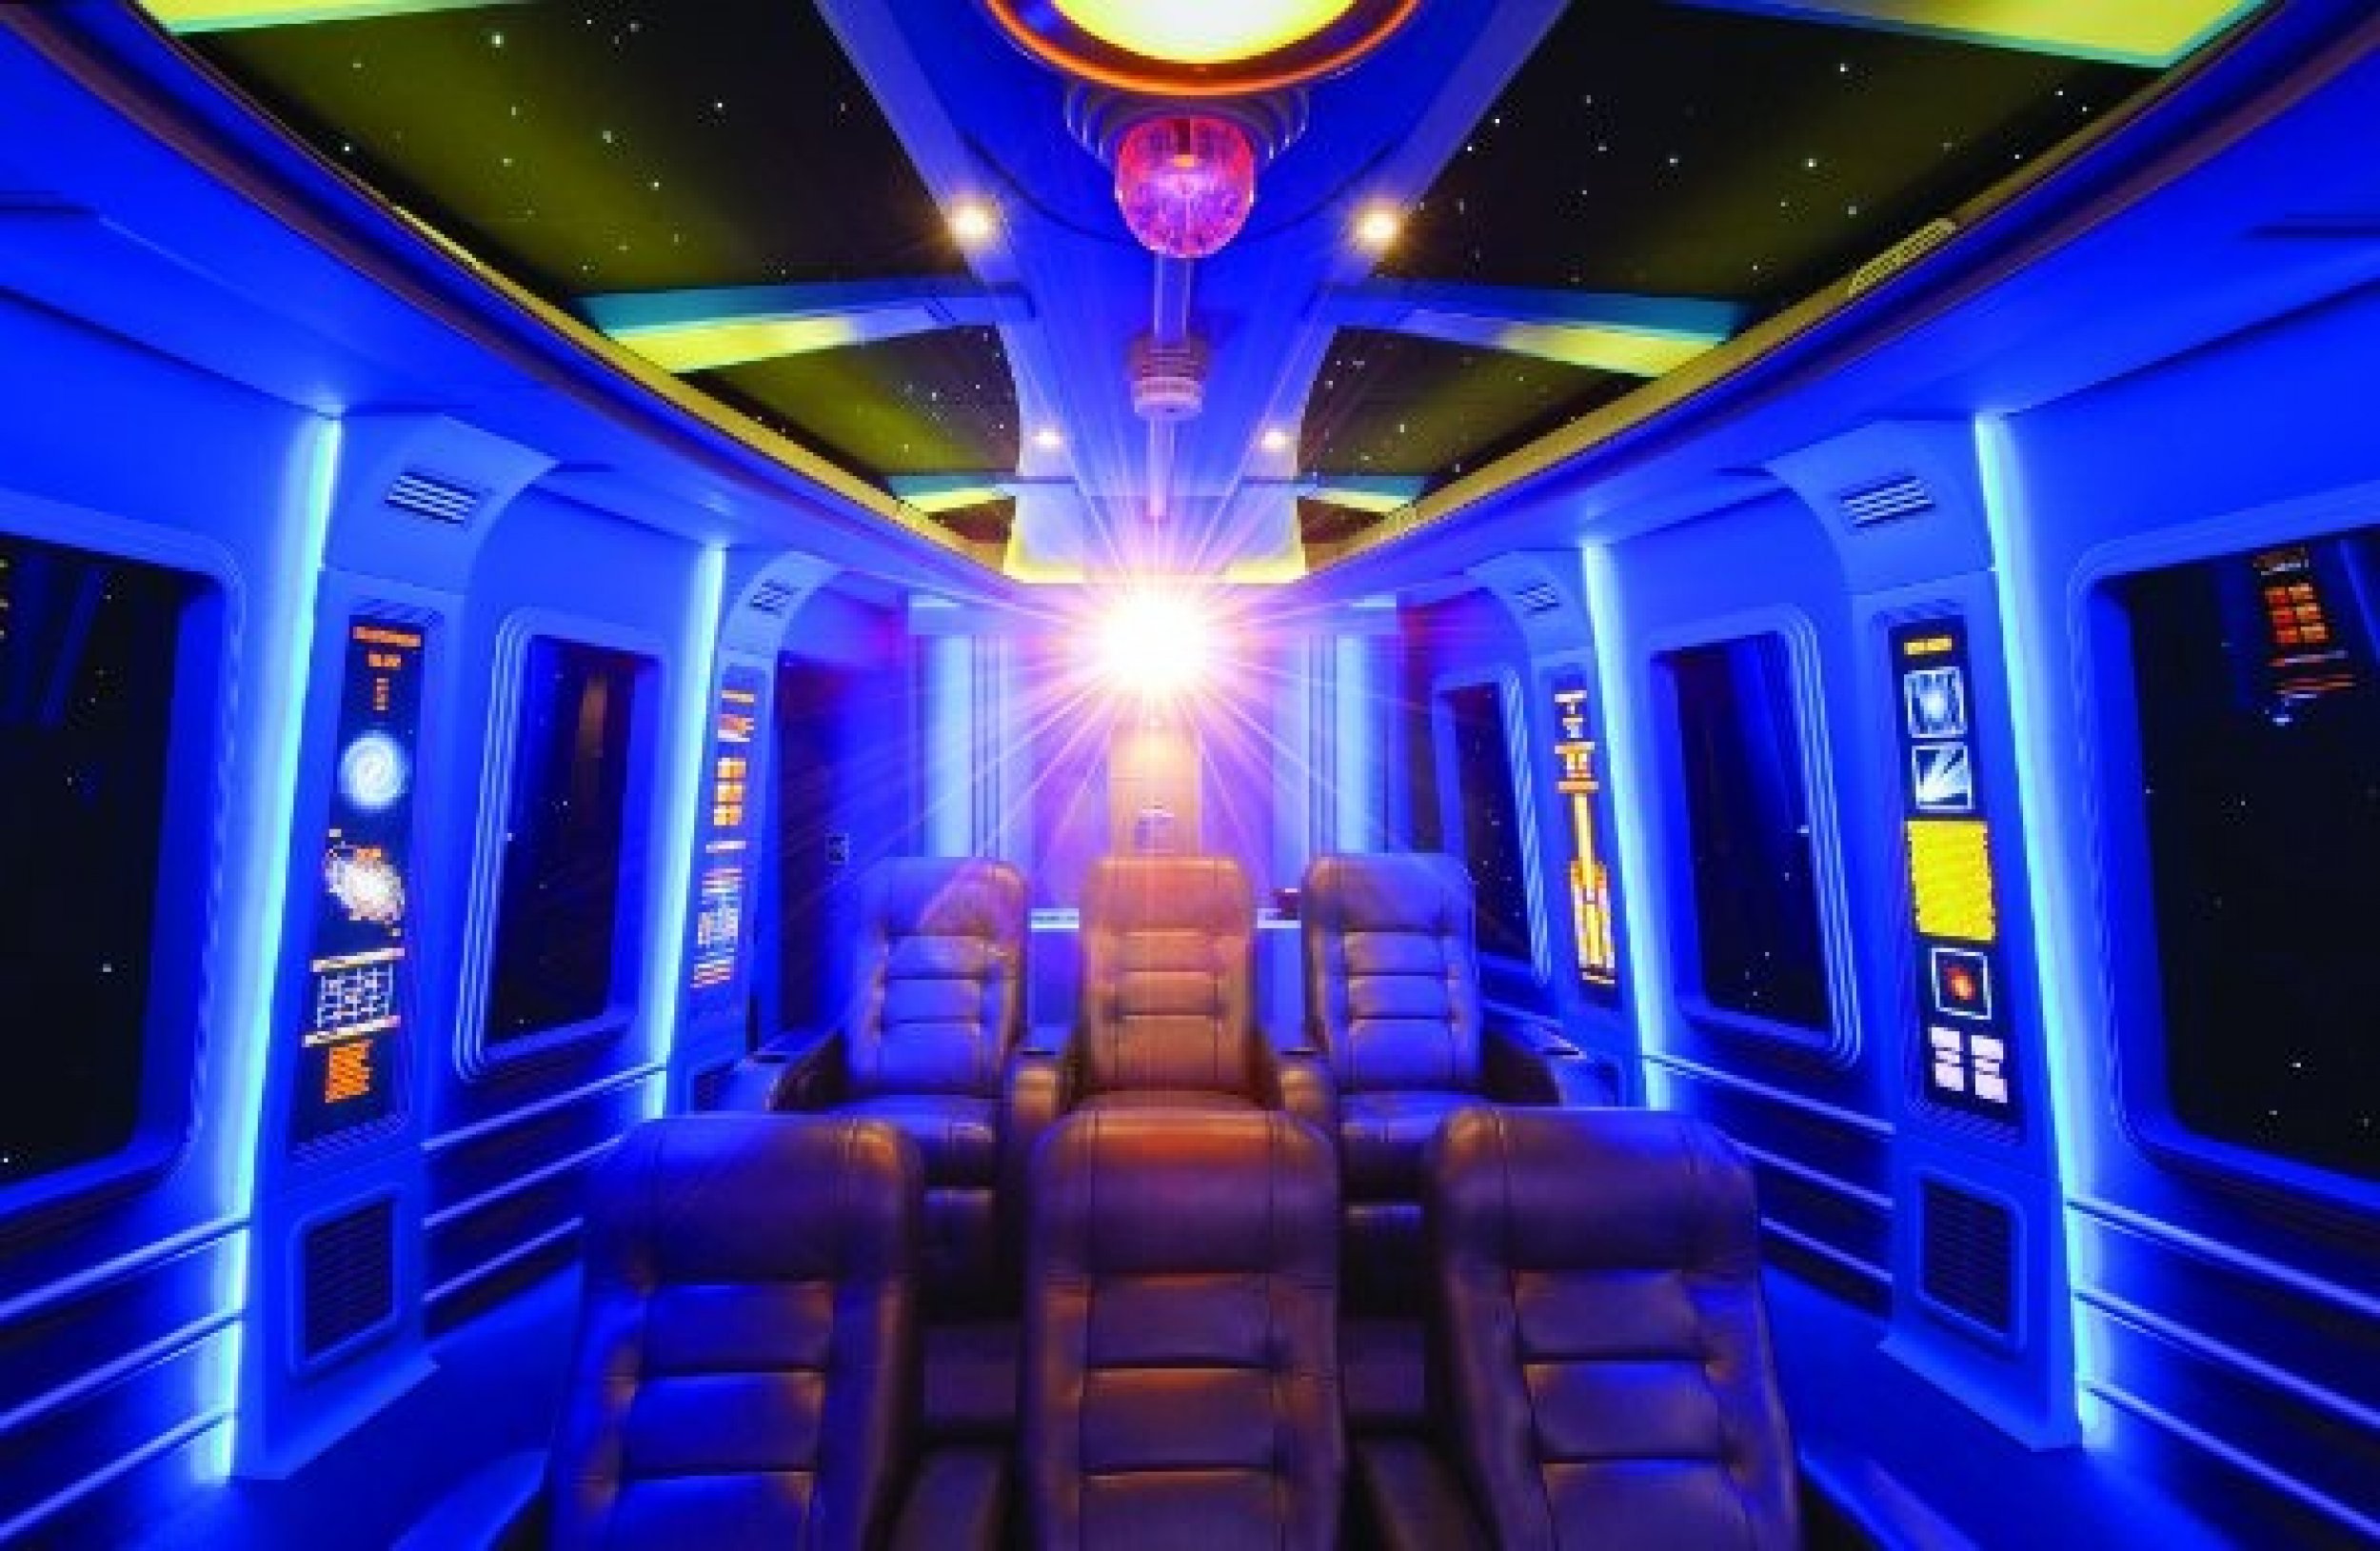 Star Wars Home Theater